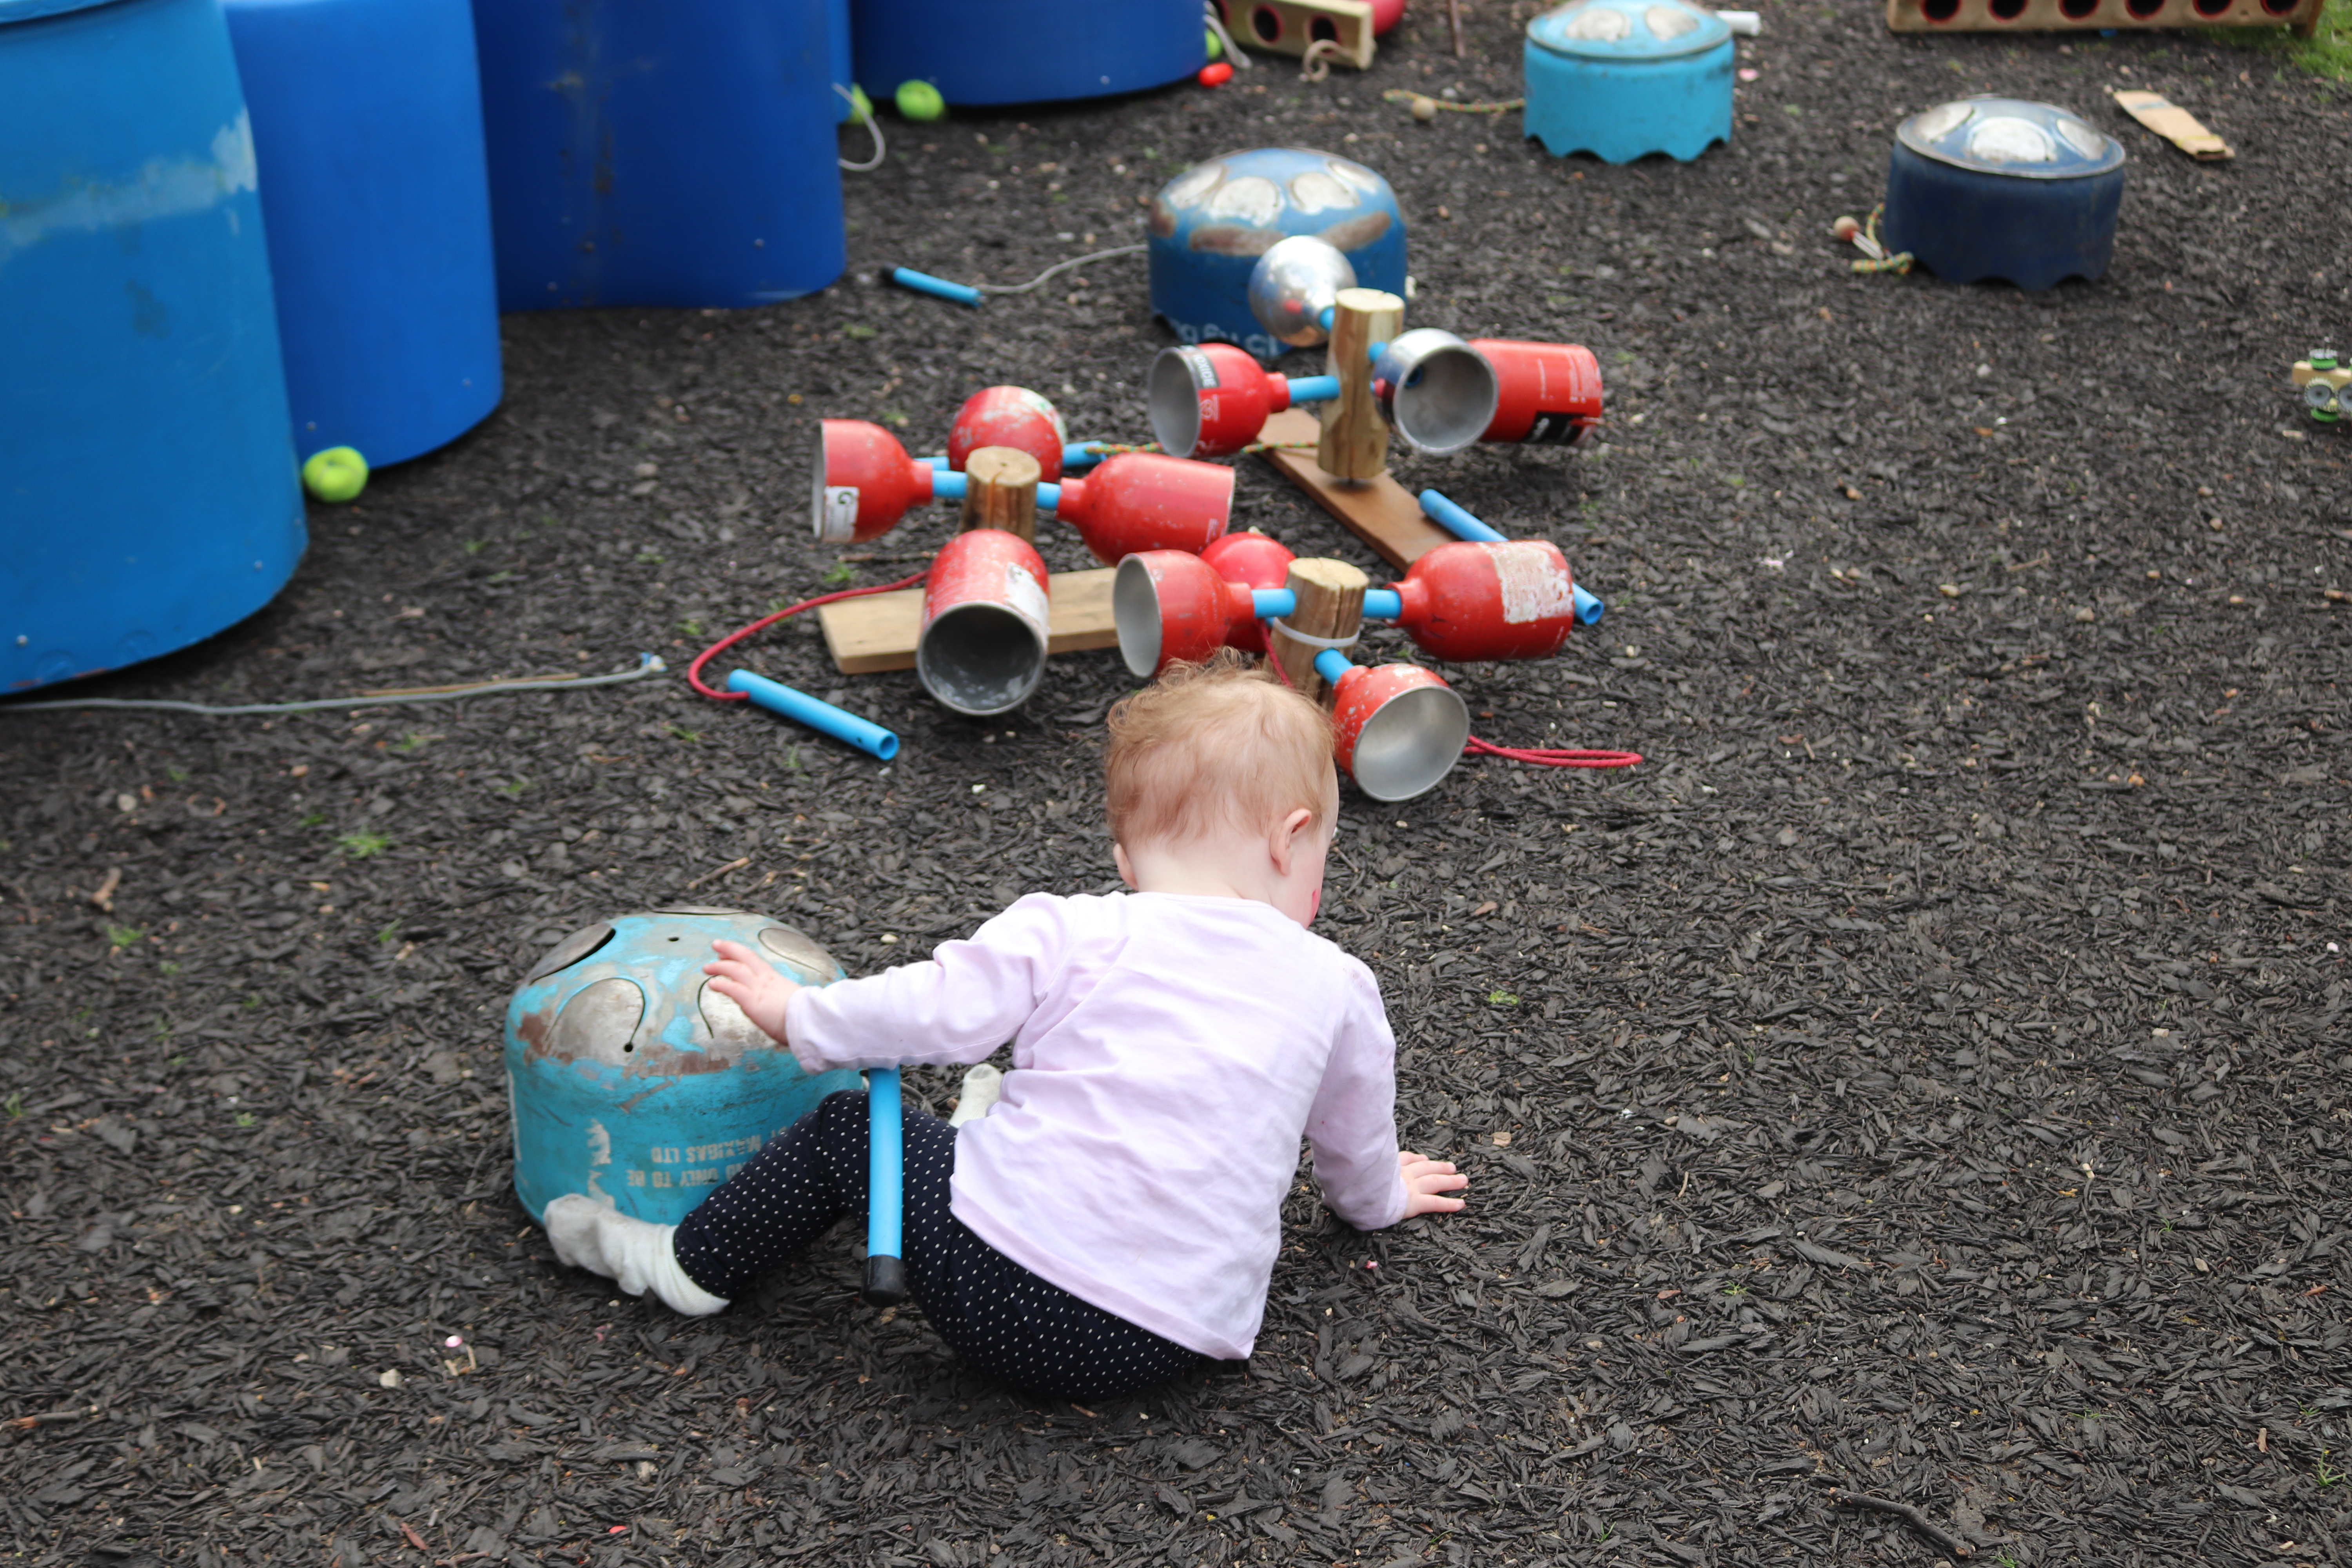 Baby playing with junk orchestra